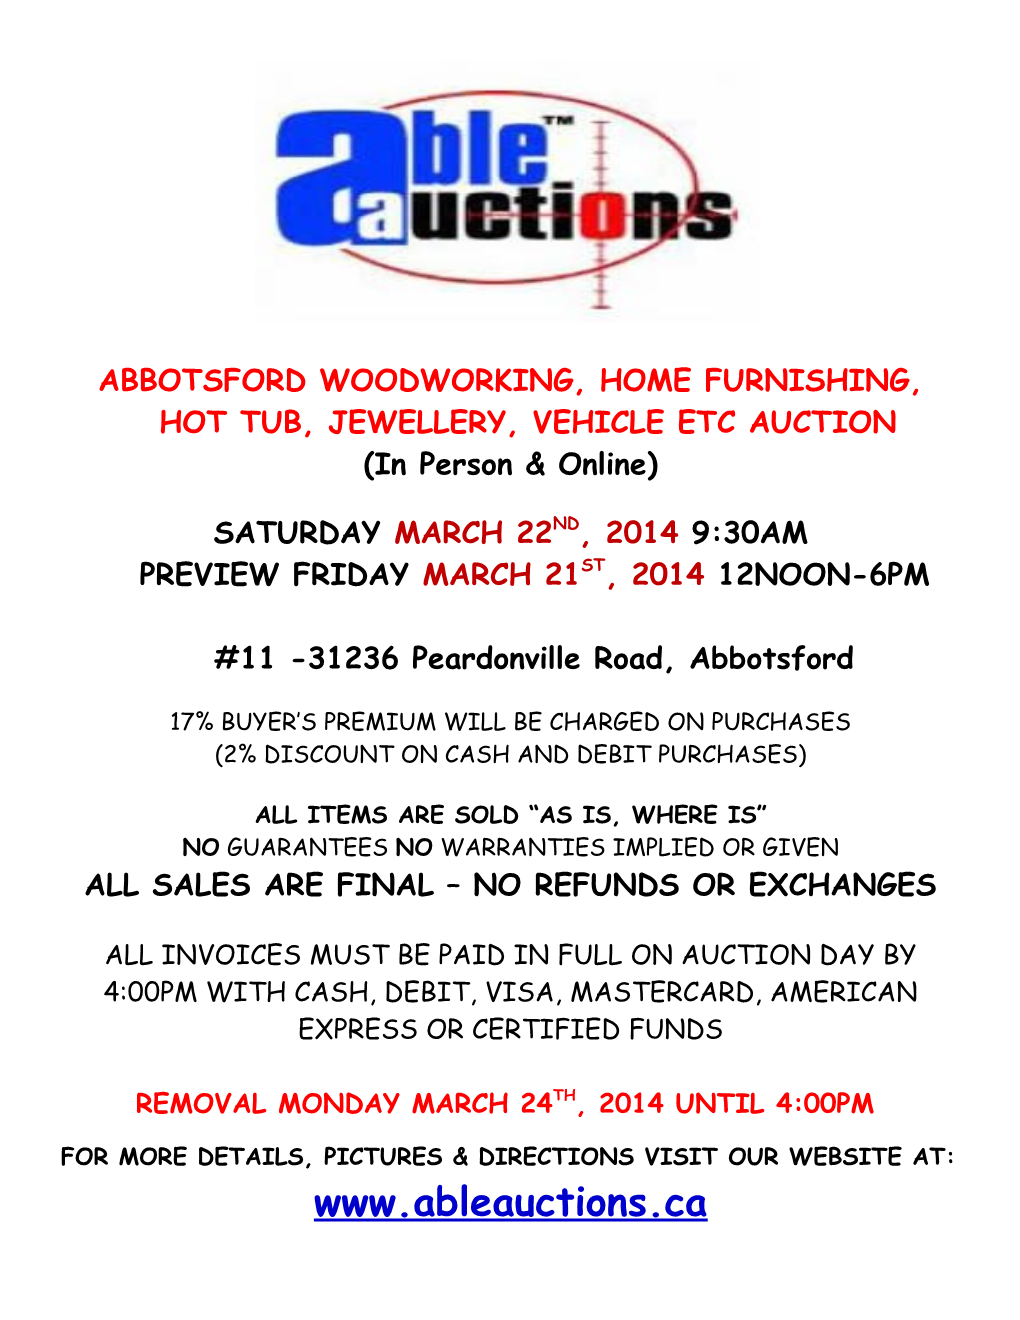 Abbotsford Woodworking, Home Furnishing, Hot Tub, Jewellery, Vehicle Etc Auction